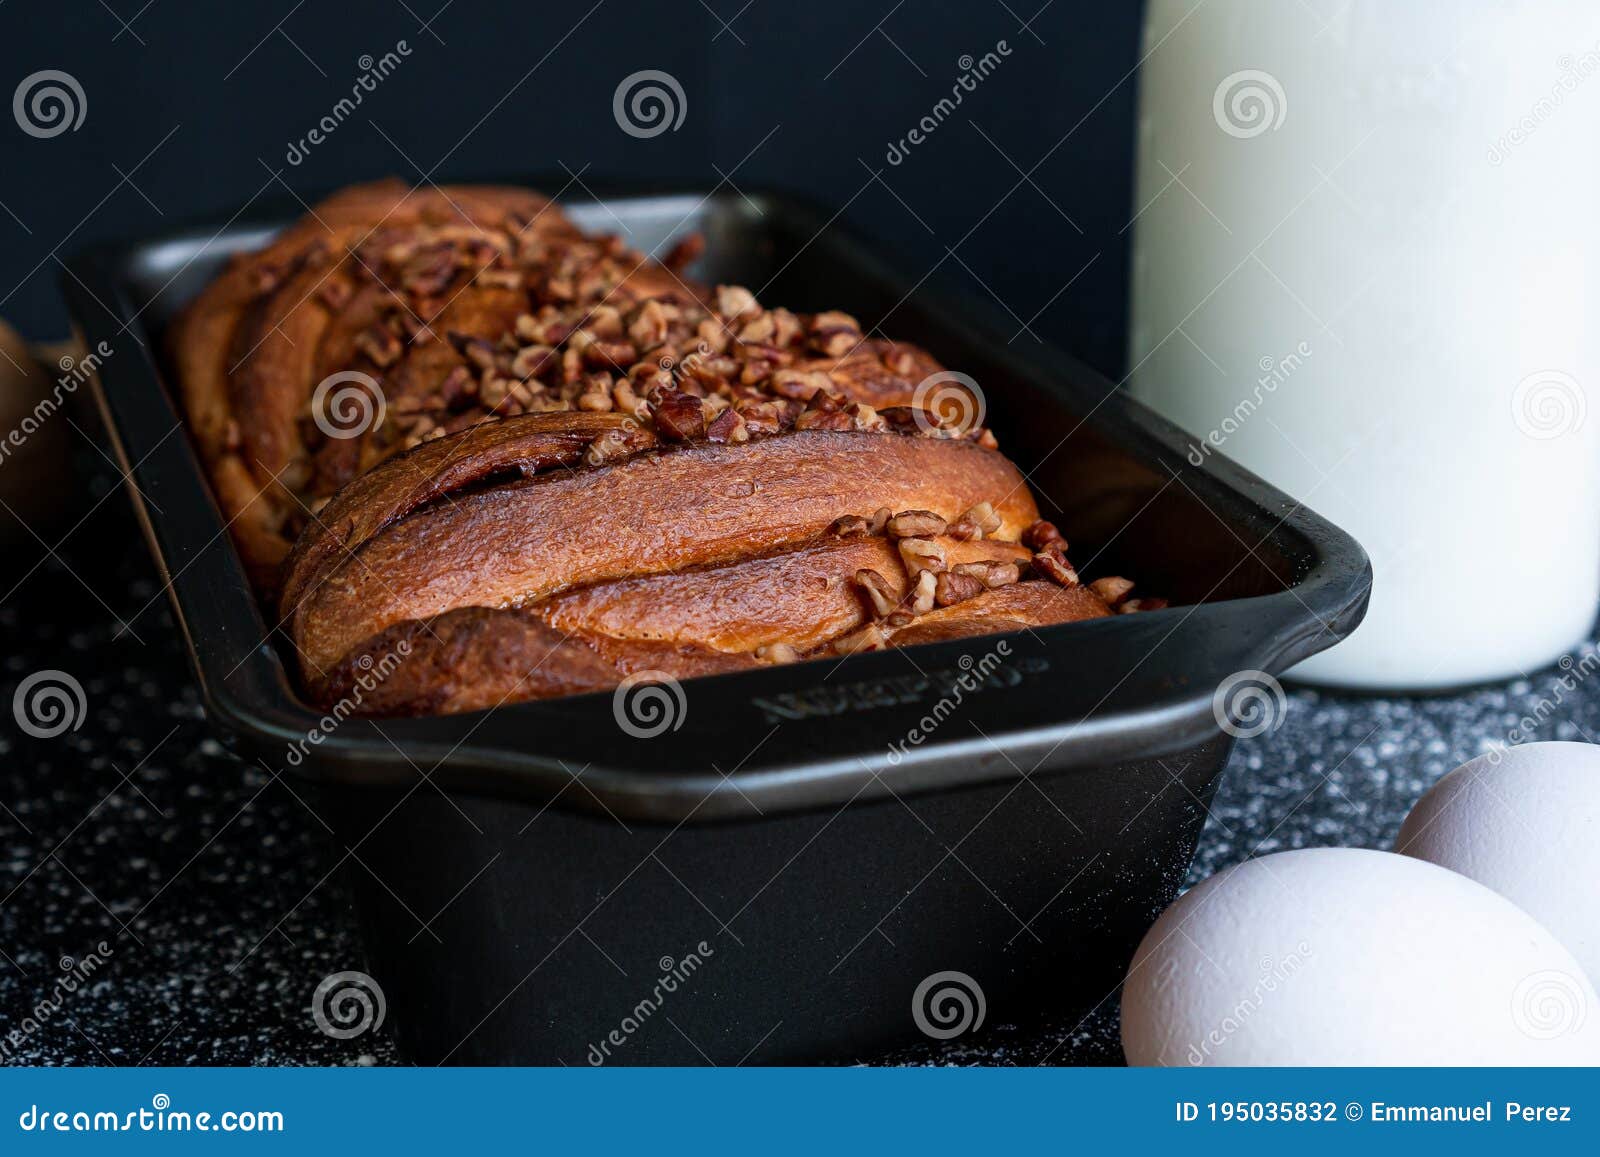 delicious trenza bread garnished with ground nuts with a bottle of milk, eggs in front and a black background